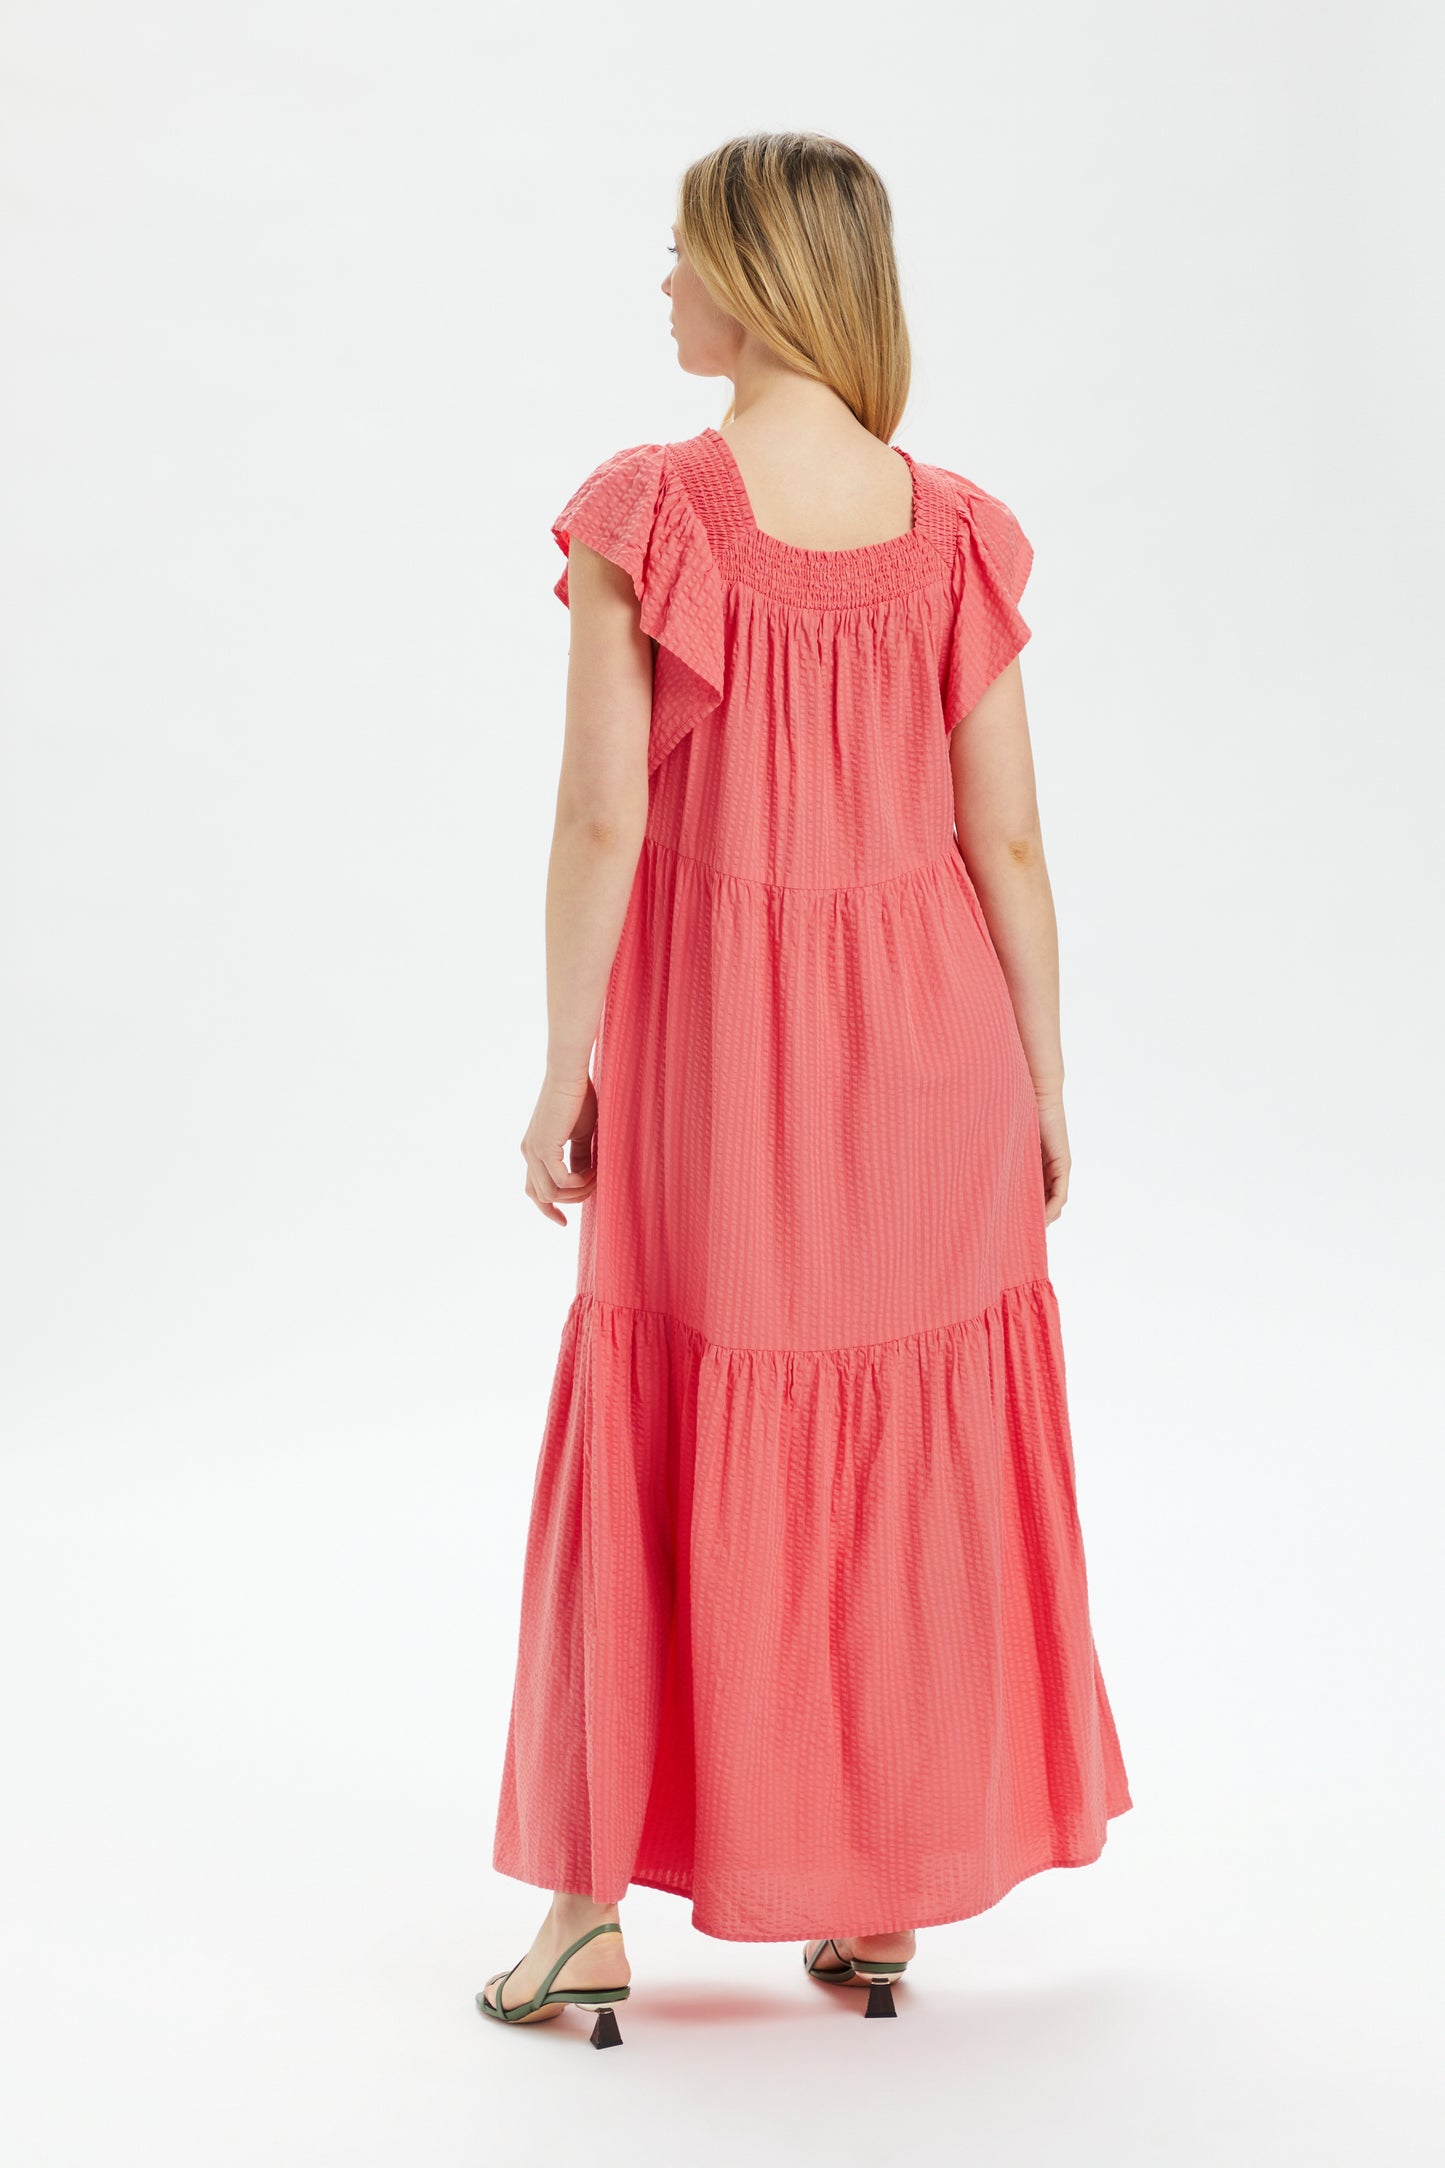 Soaked in Luxury Delphine Maxi Dress Dresses Porcelain Rose